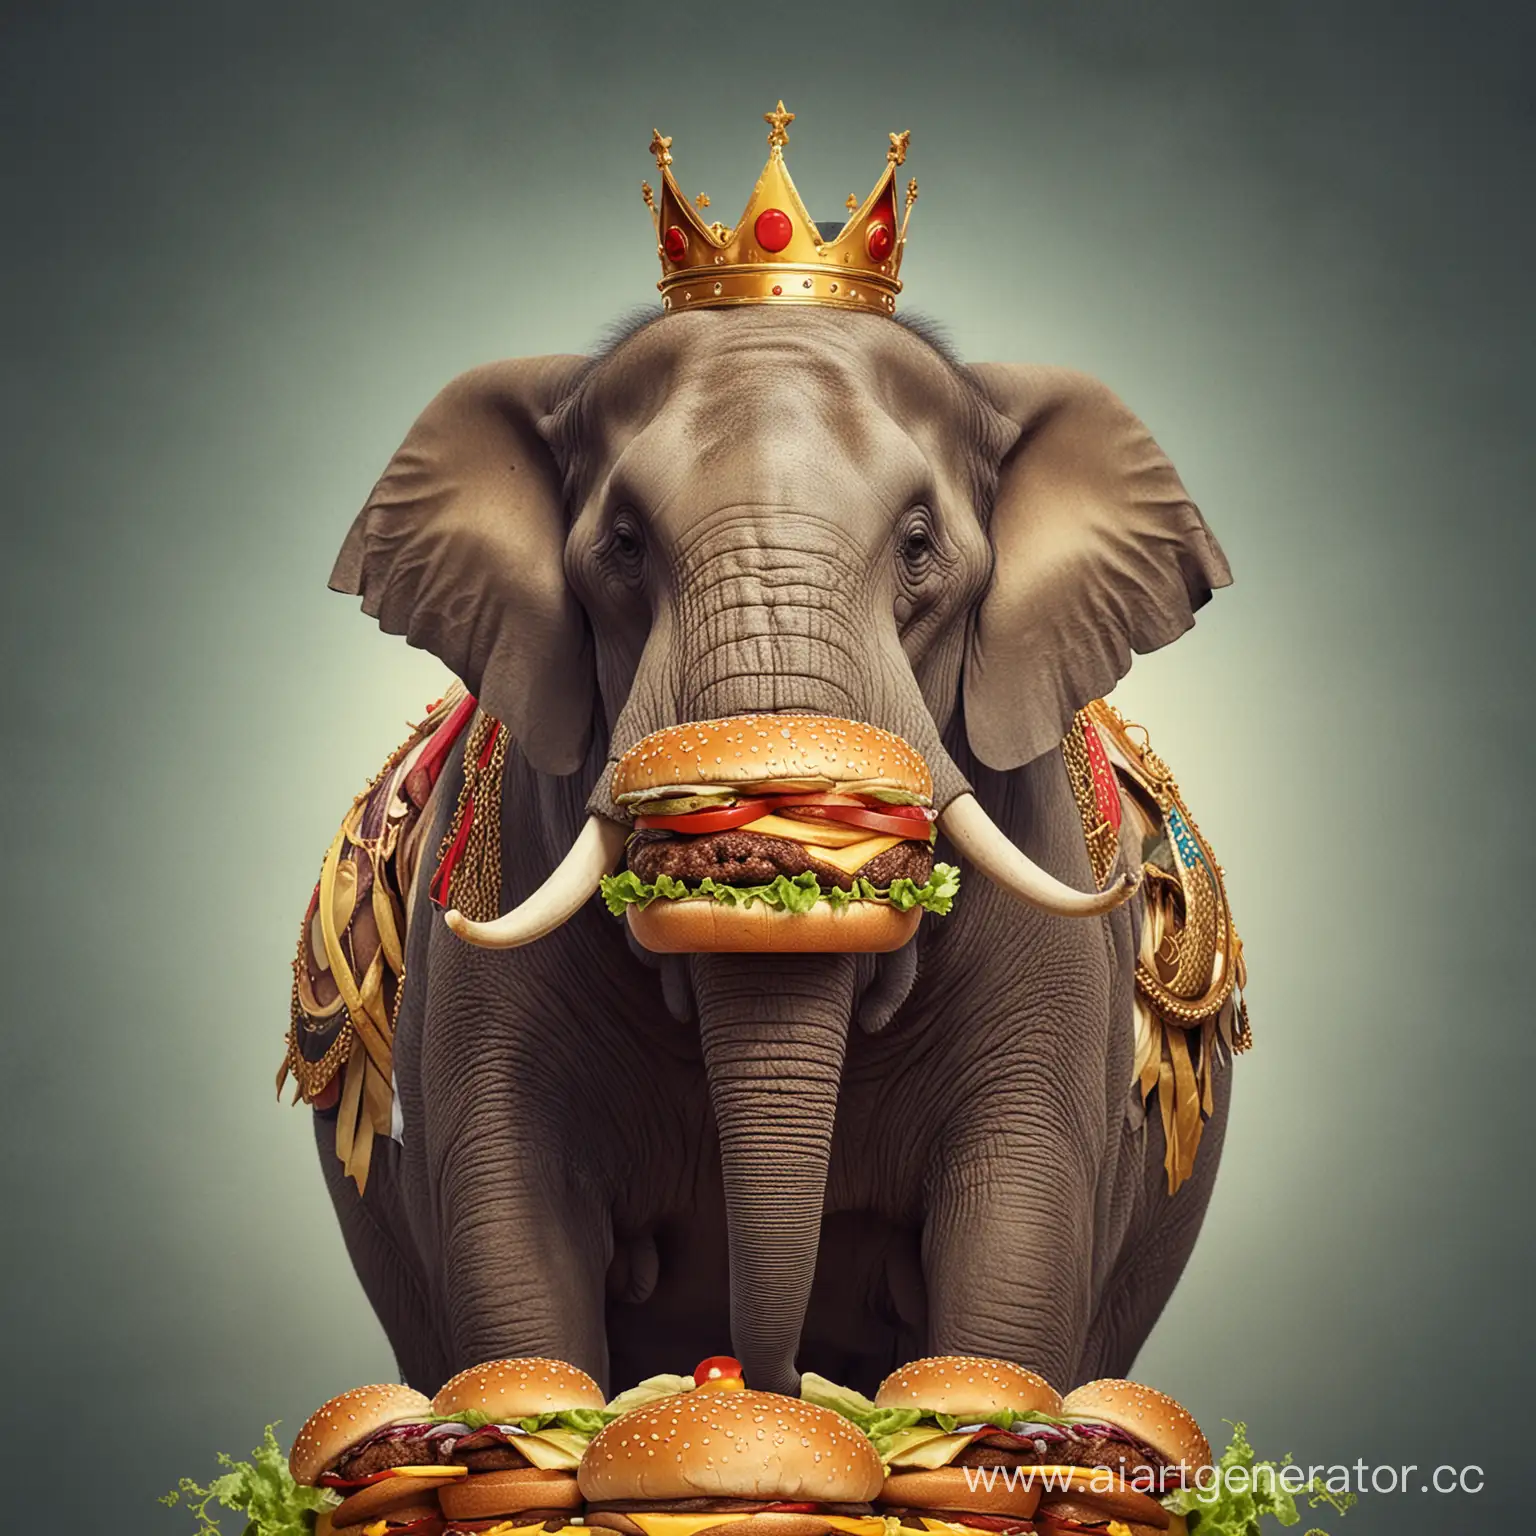 Big elephant king with hamburger in mouth